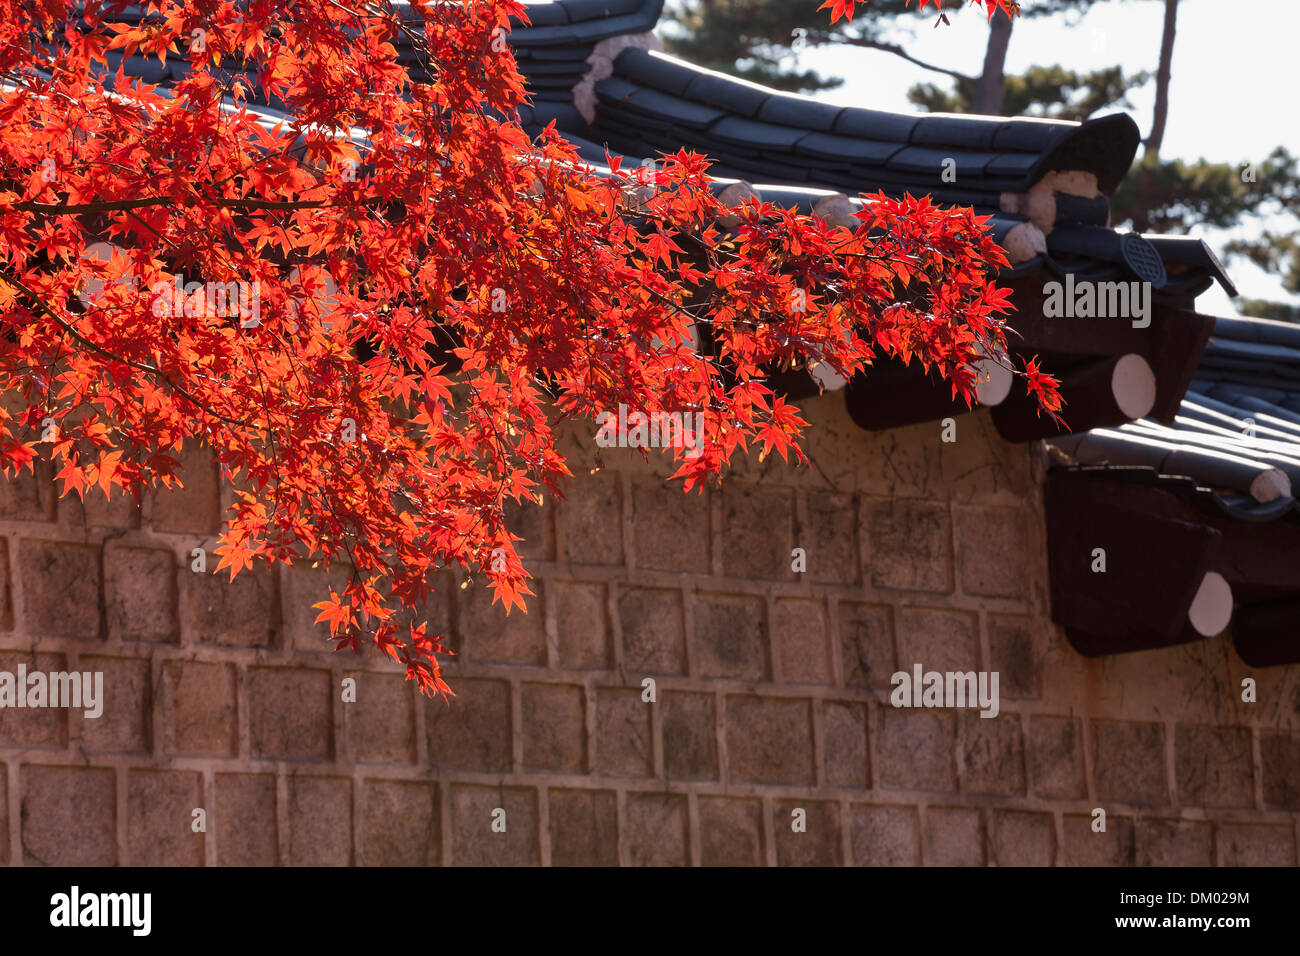 Maple leaves showing autumn colors against traditional stone wall - Seoul, South Korea Stock Photo